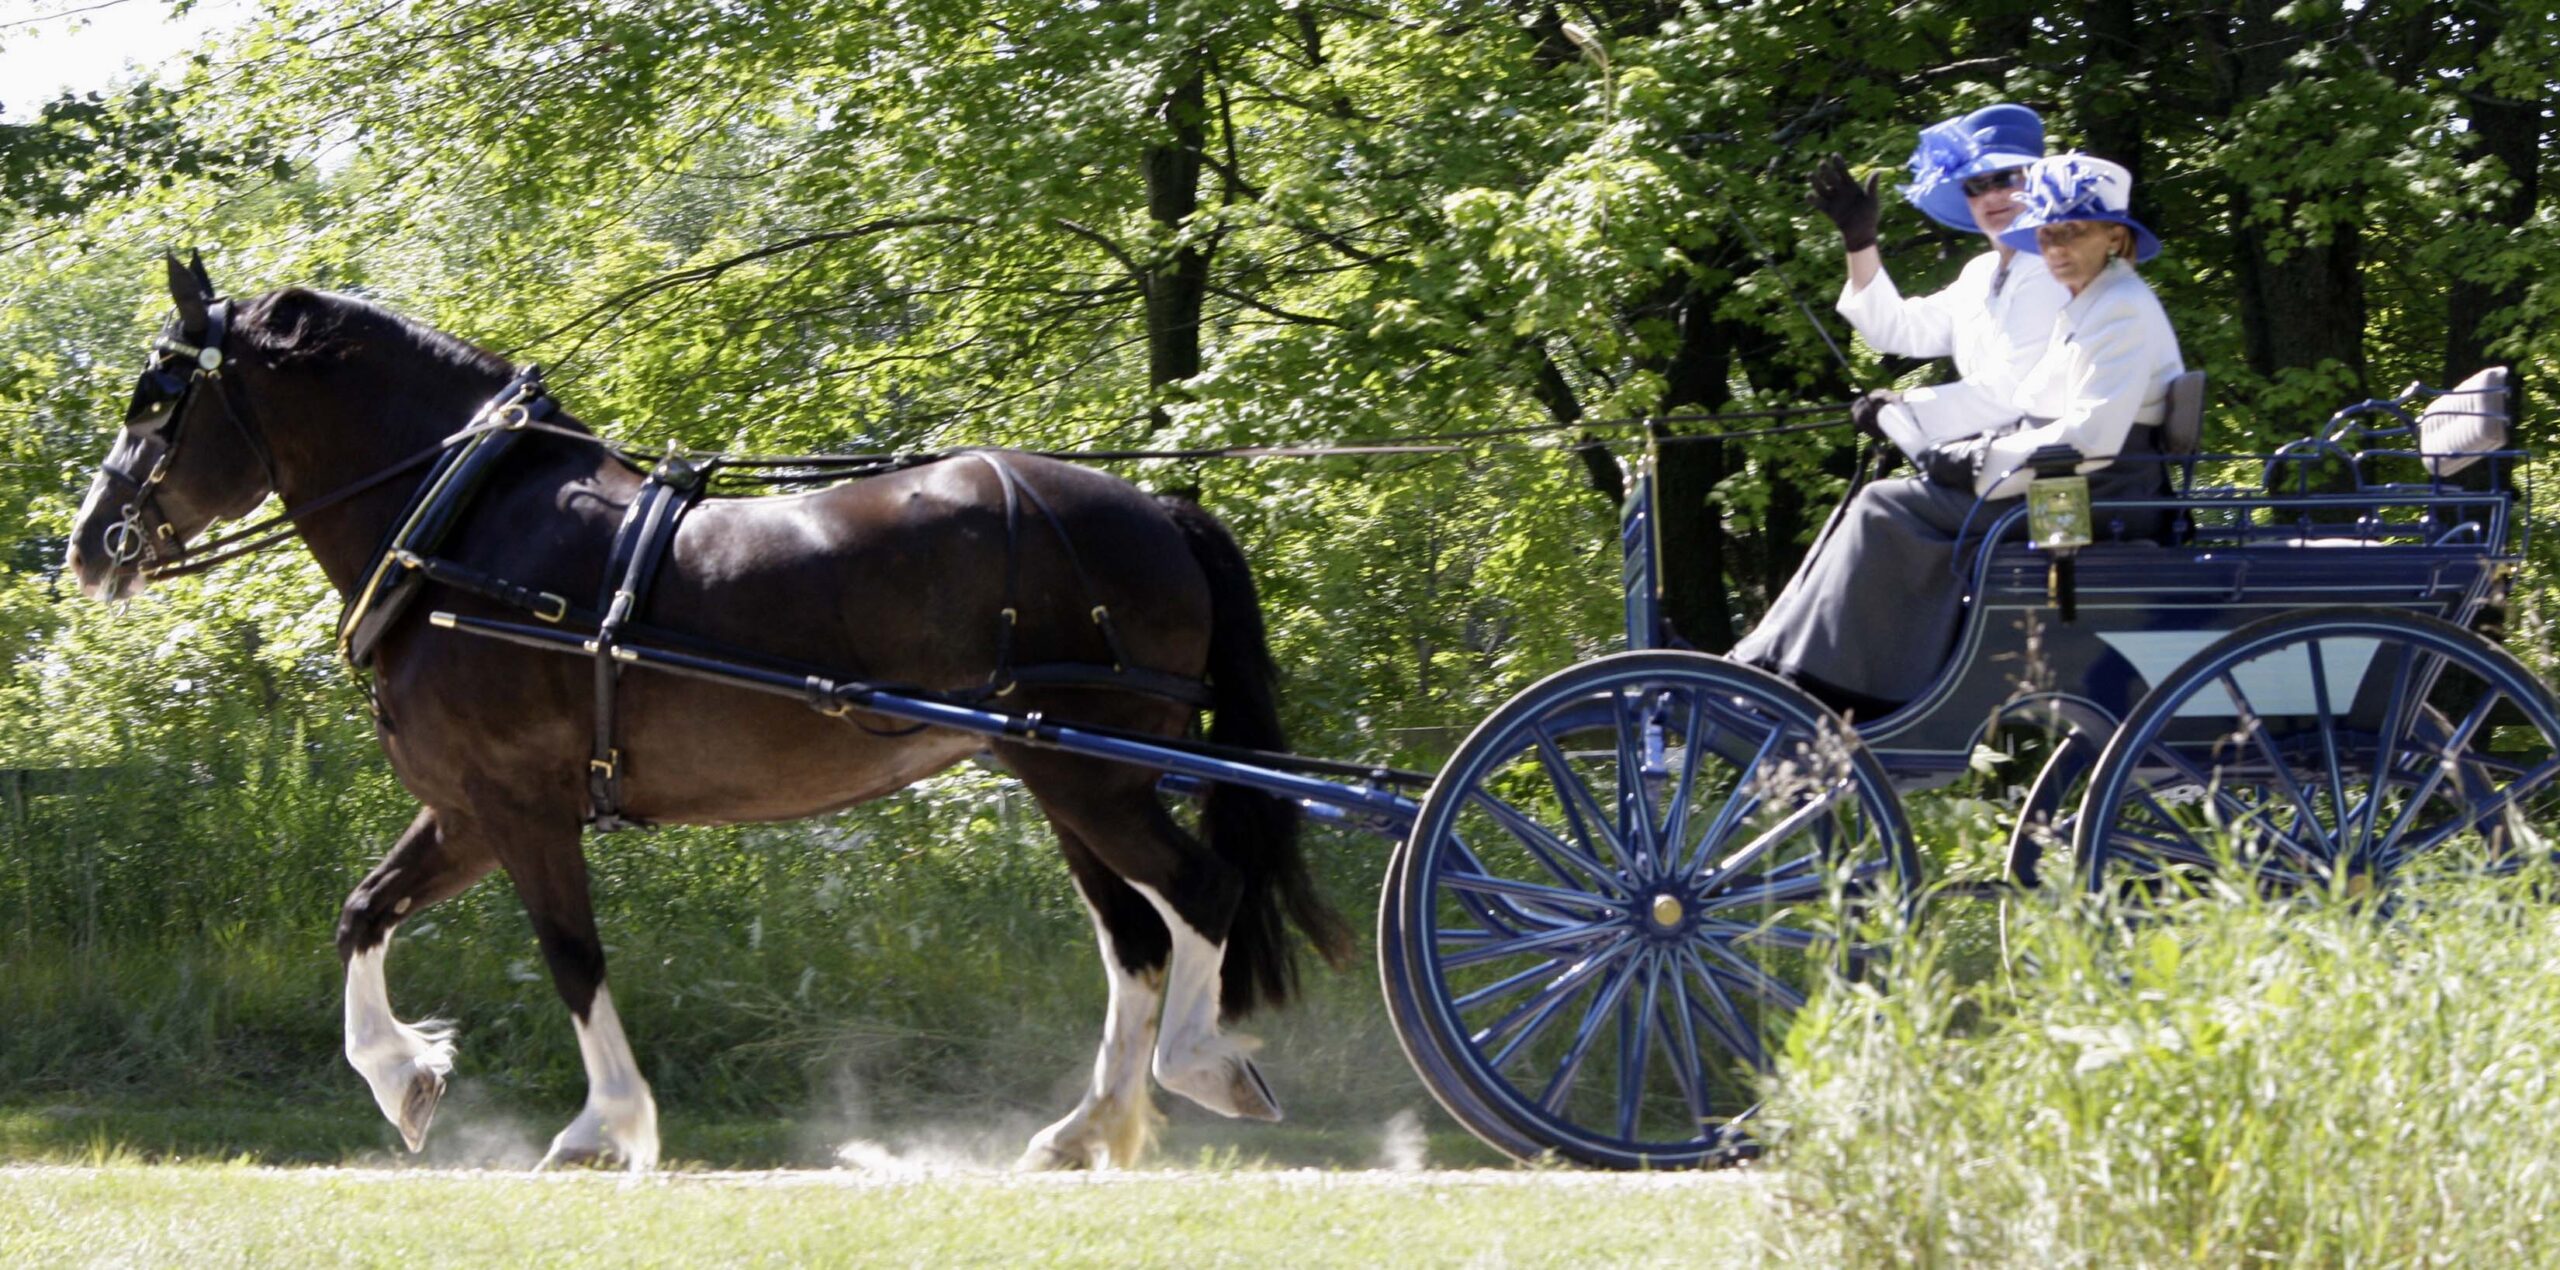 ‘For the love of the horse’: Horse-drawn carriage driving competition brings history alive